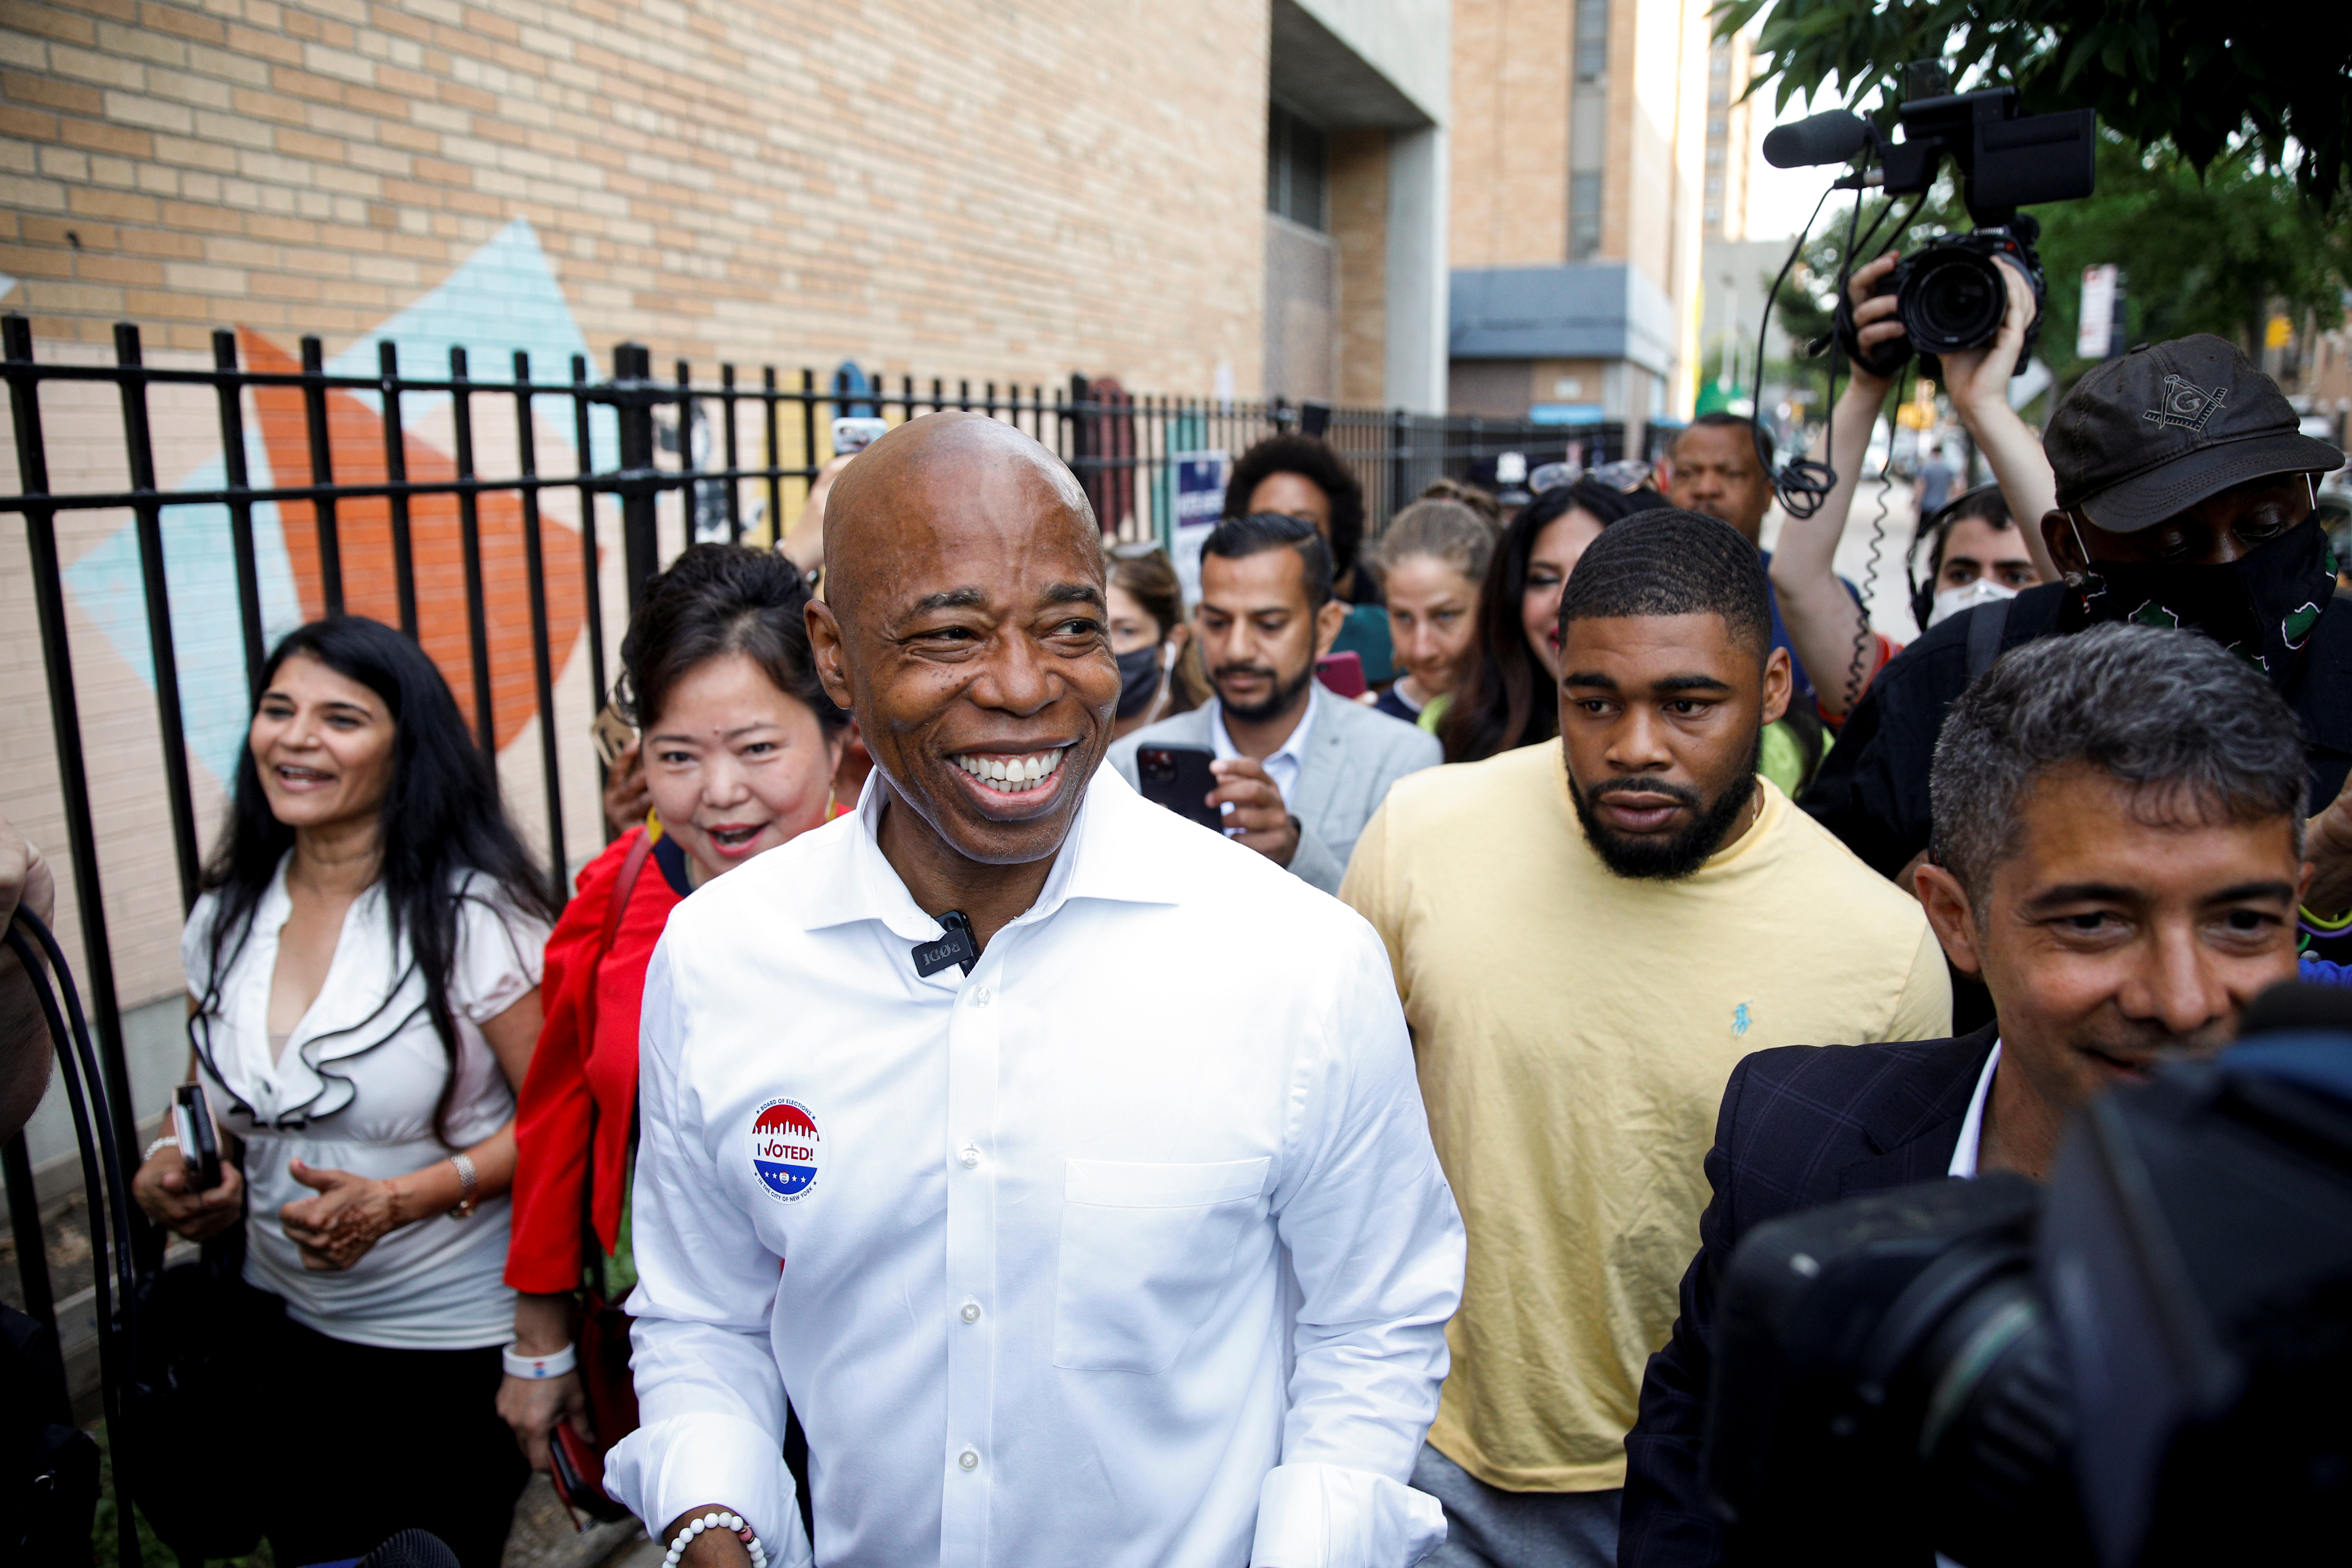 Eric Adams, Democratic candidate for New York City Mayor, votes during the Primary Election in Brooklyn New York